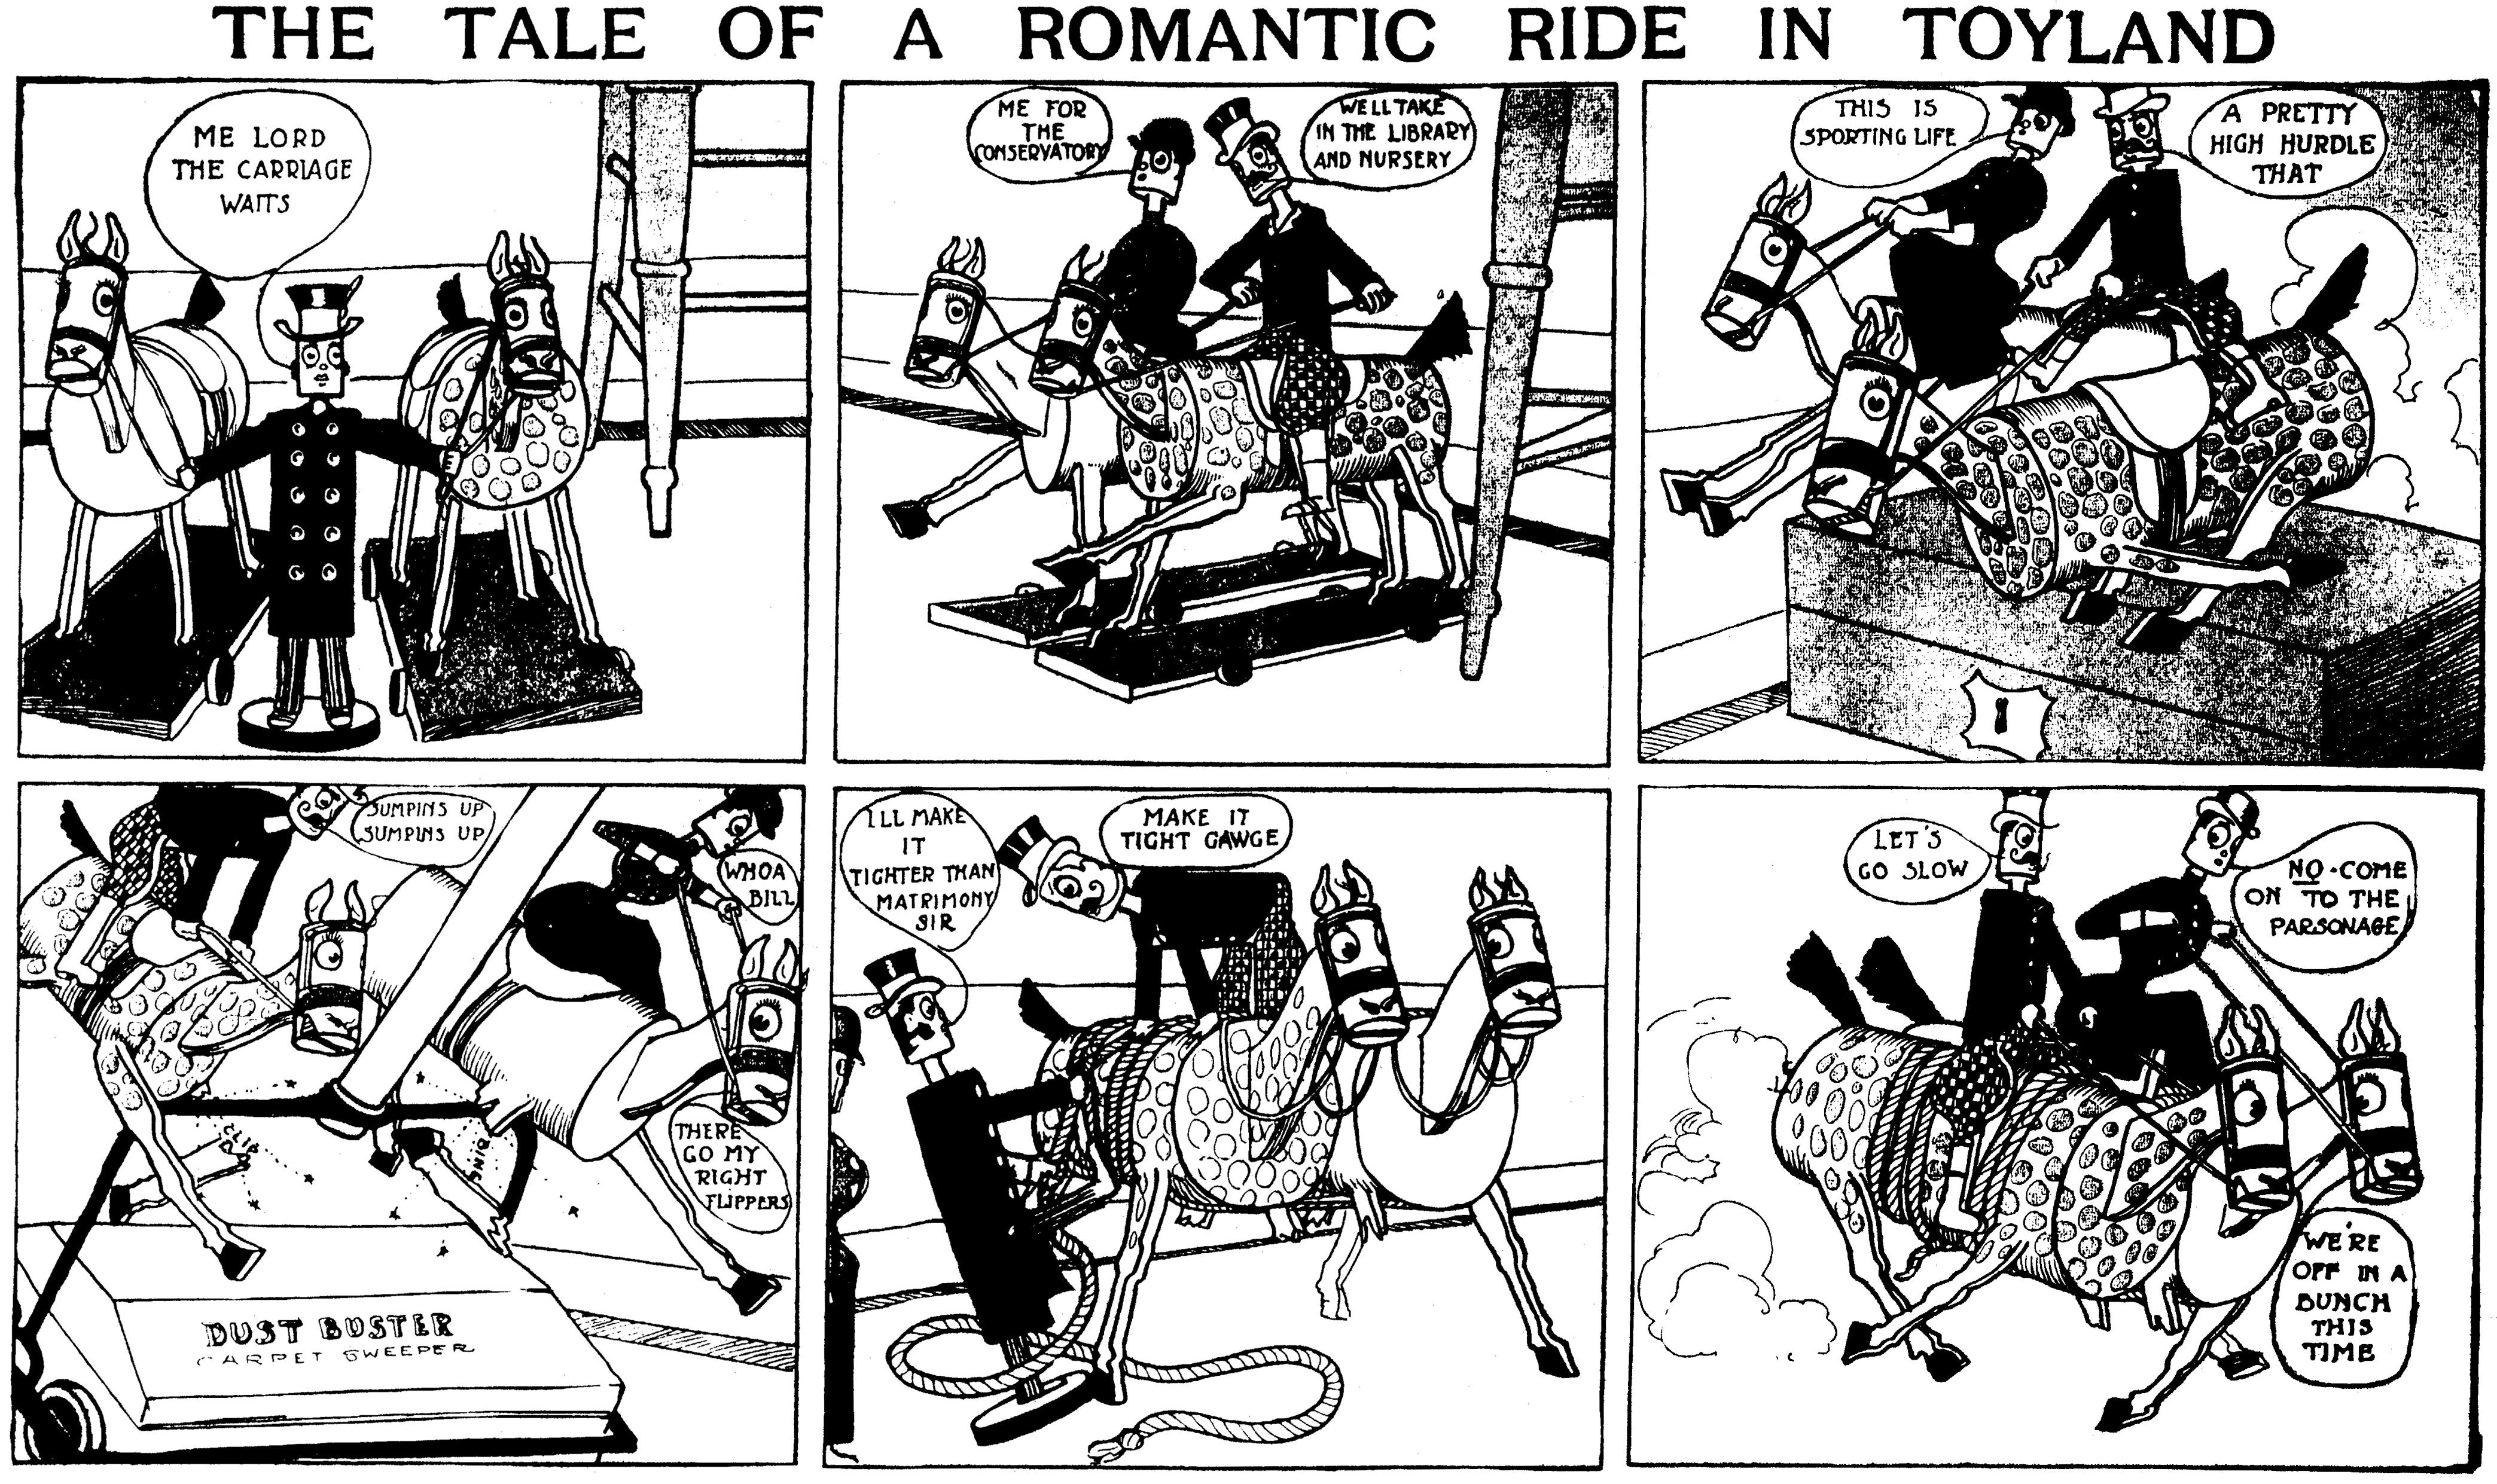 The Tale of a Romantic Ride in Toyland